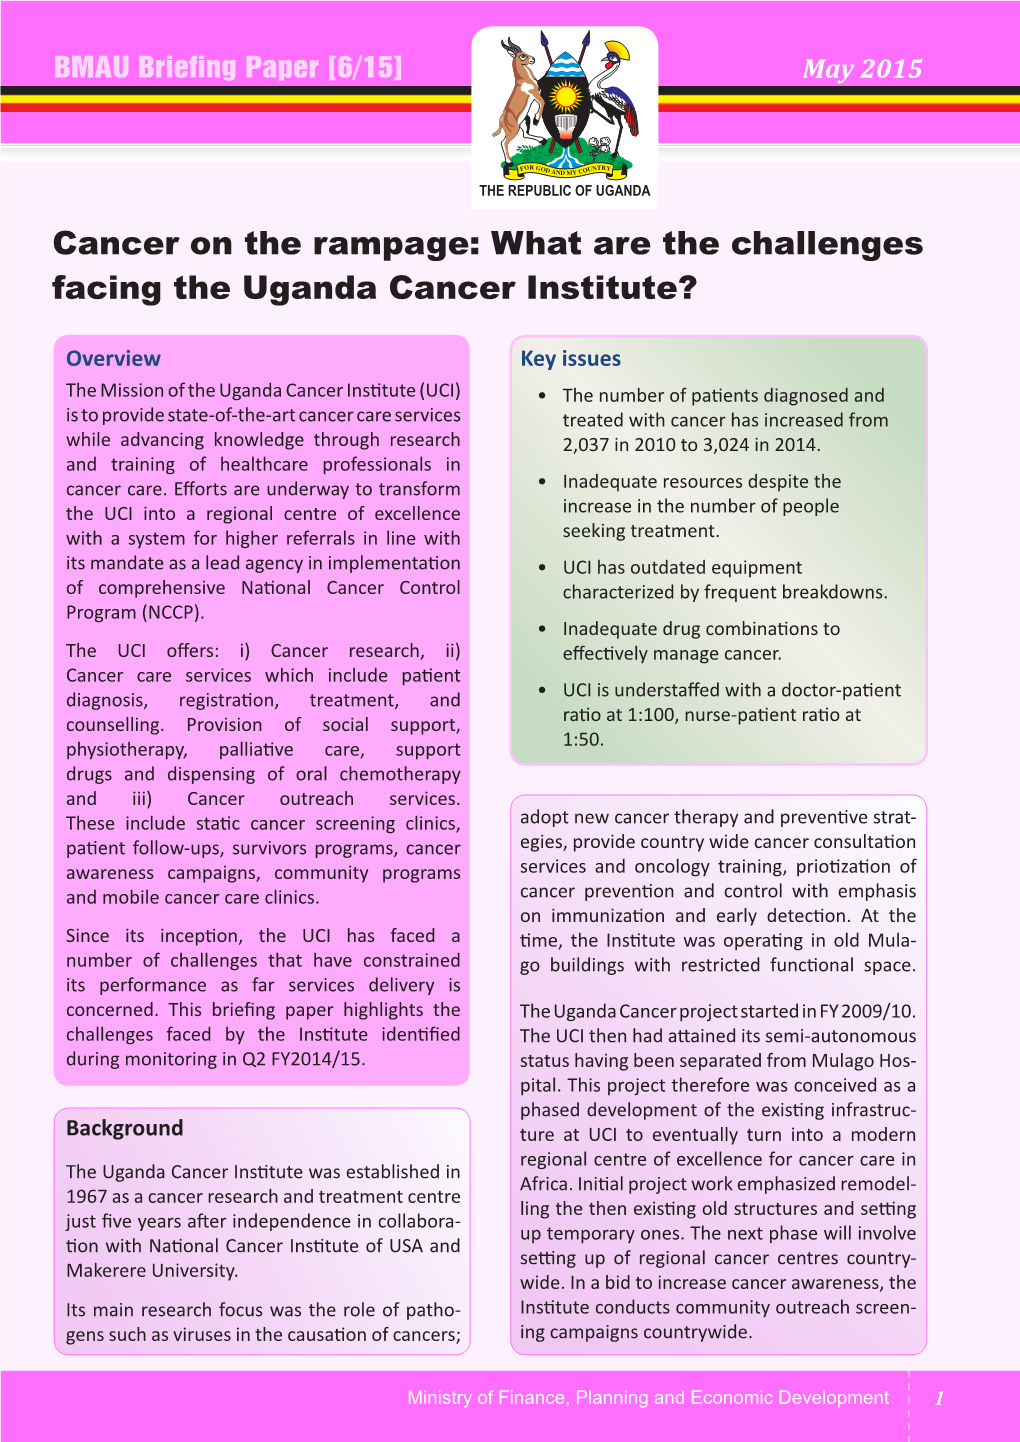 What Are the Challenges Facing the Uganda Cancer Institute?